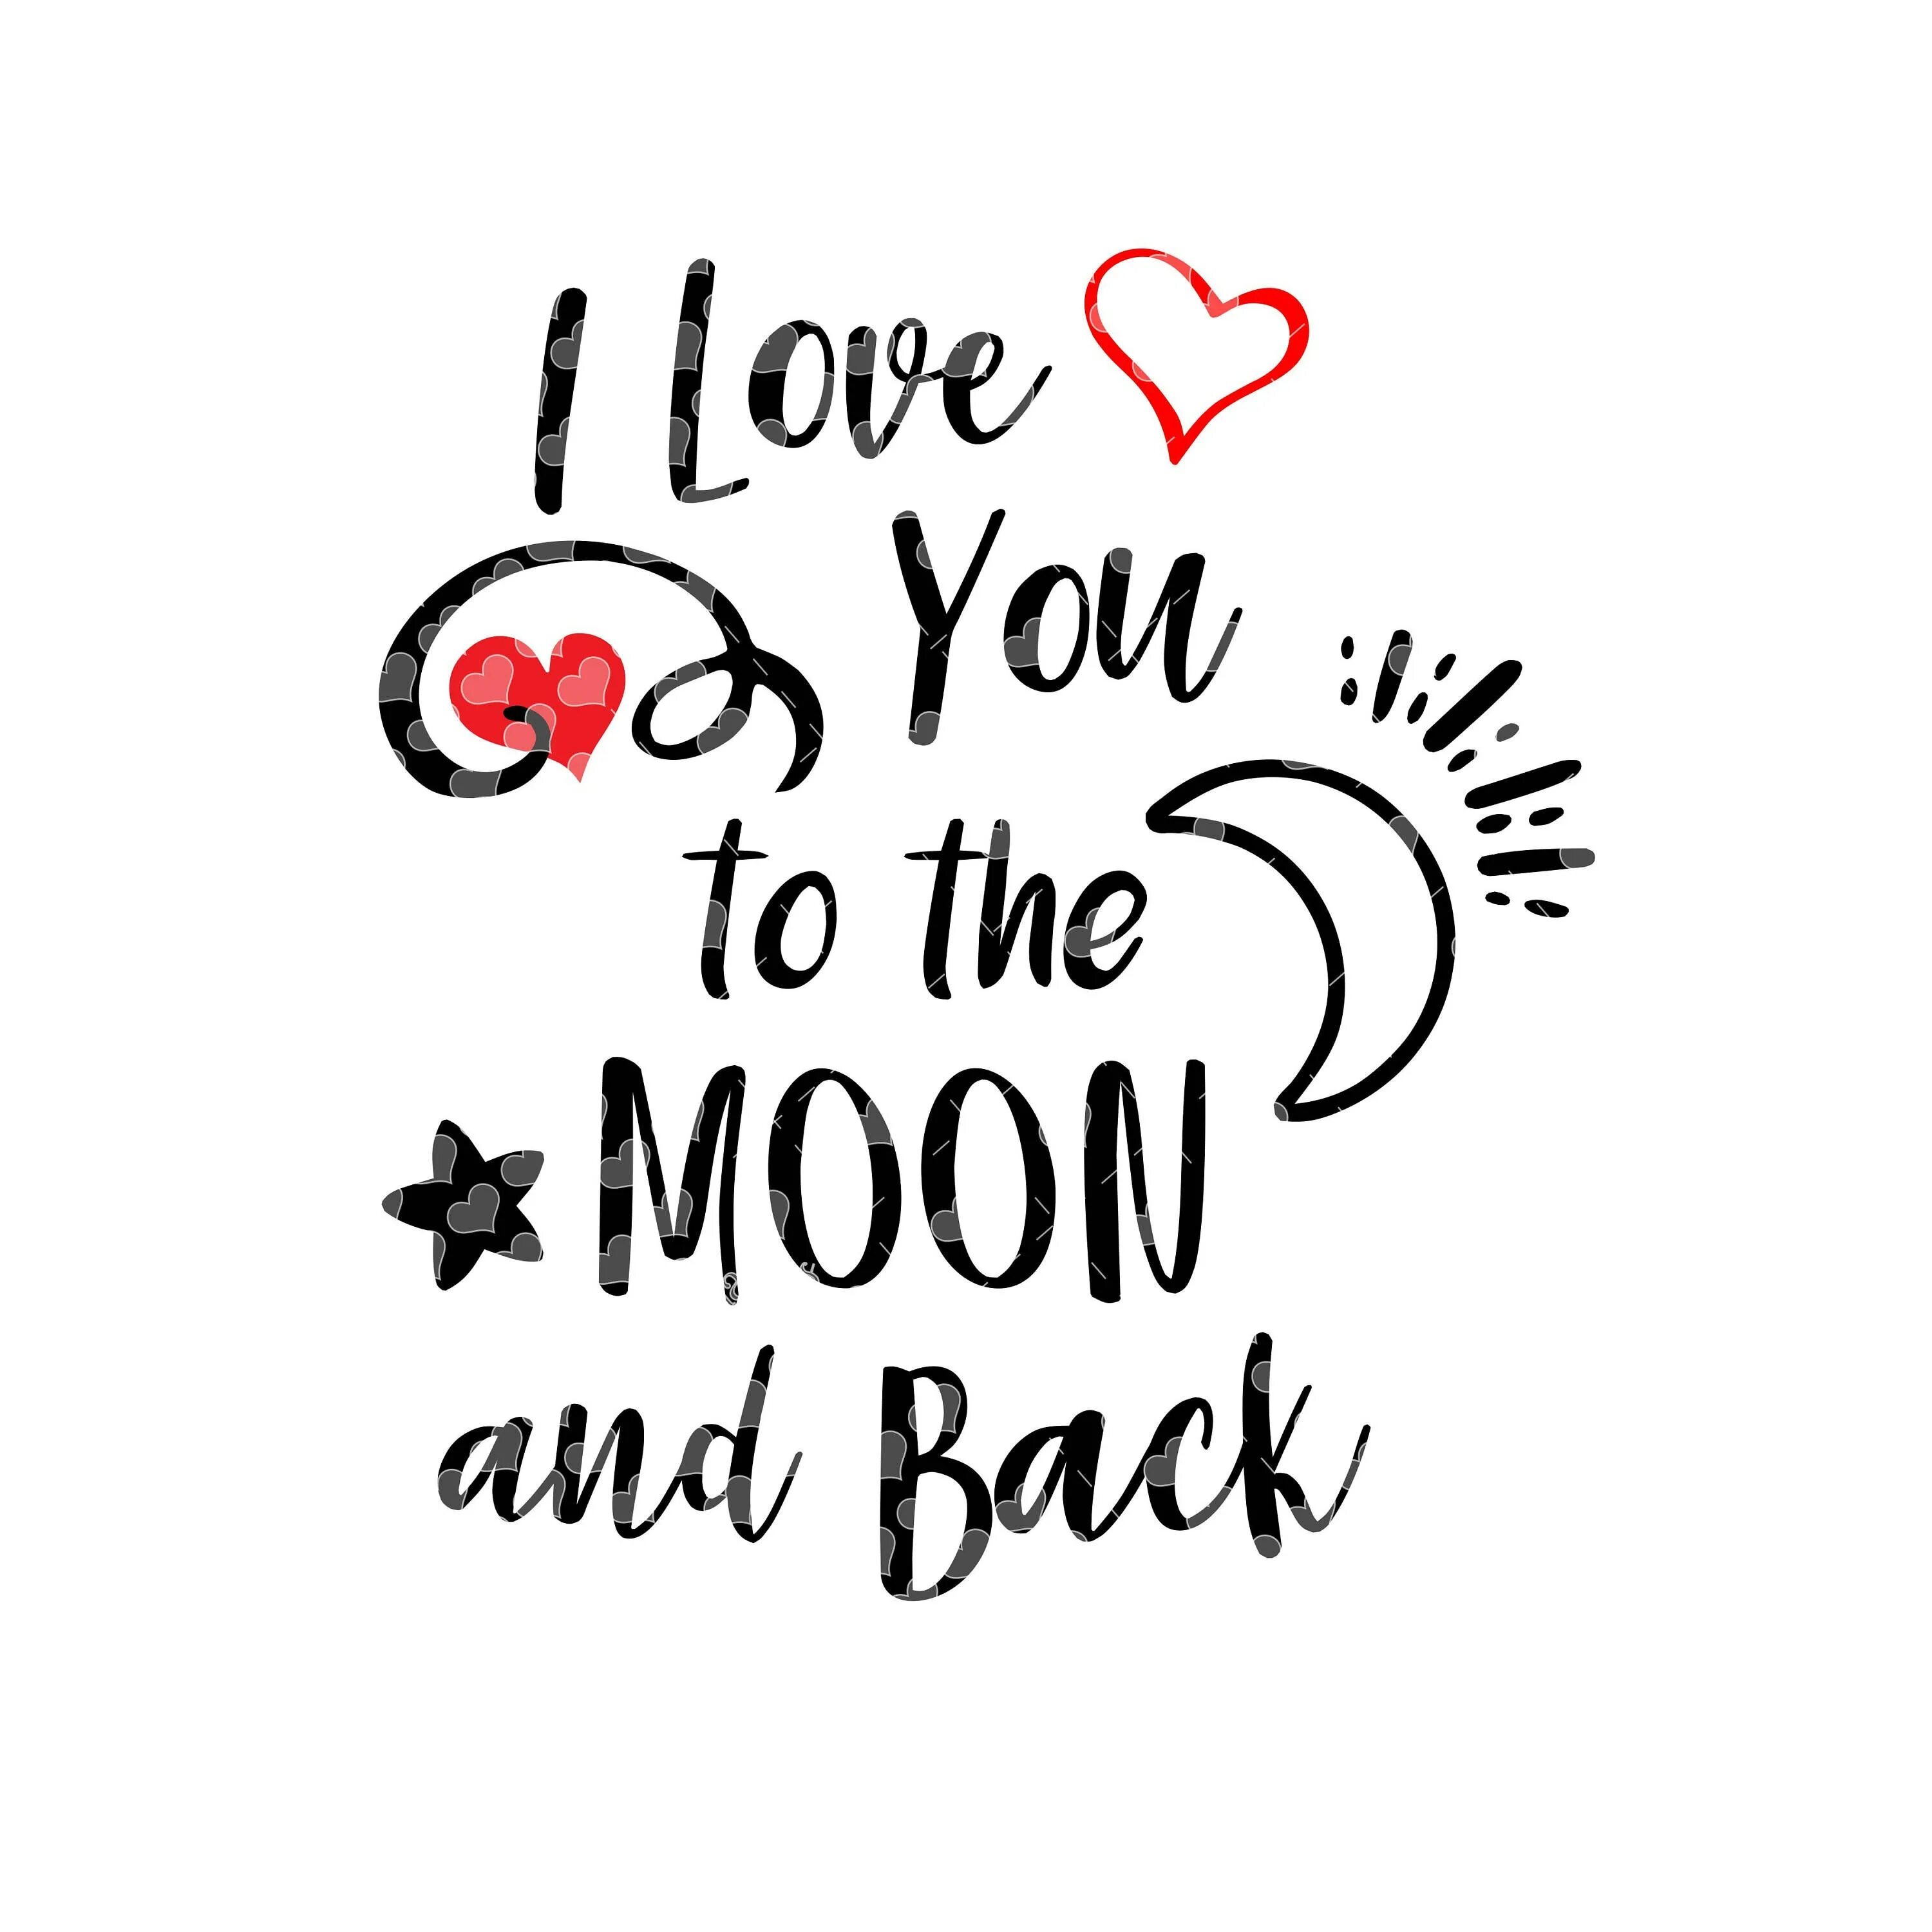 Надпись i Love you to the Moon and back. Love you to the Moon and back надпись. Тату i Love you эскиз. Love to the Moon and back. Love you to the moon